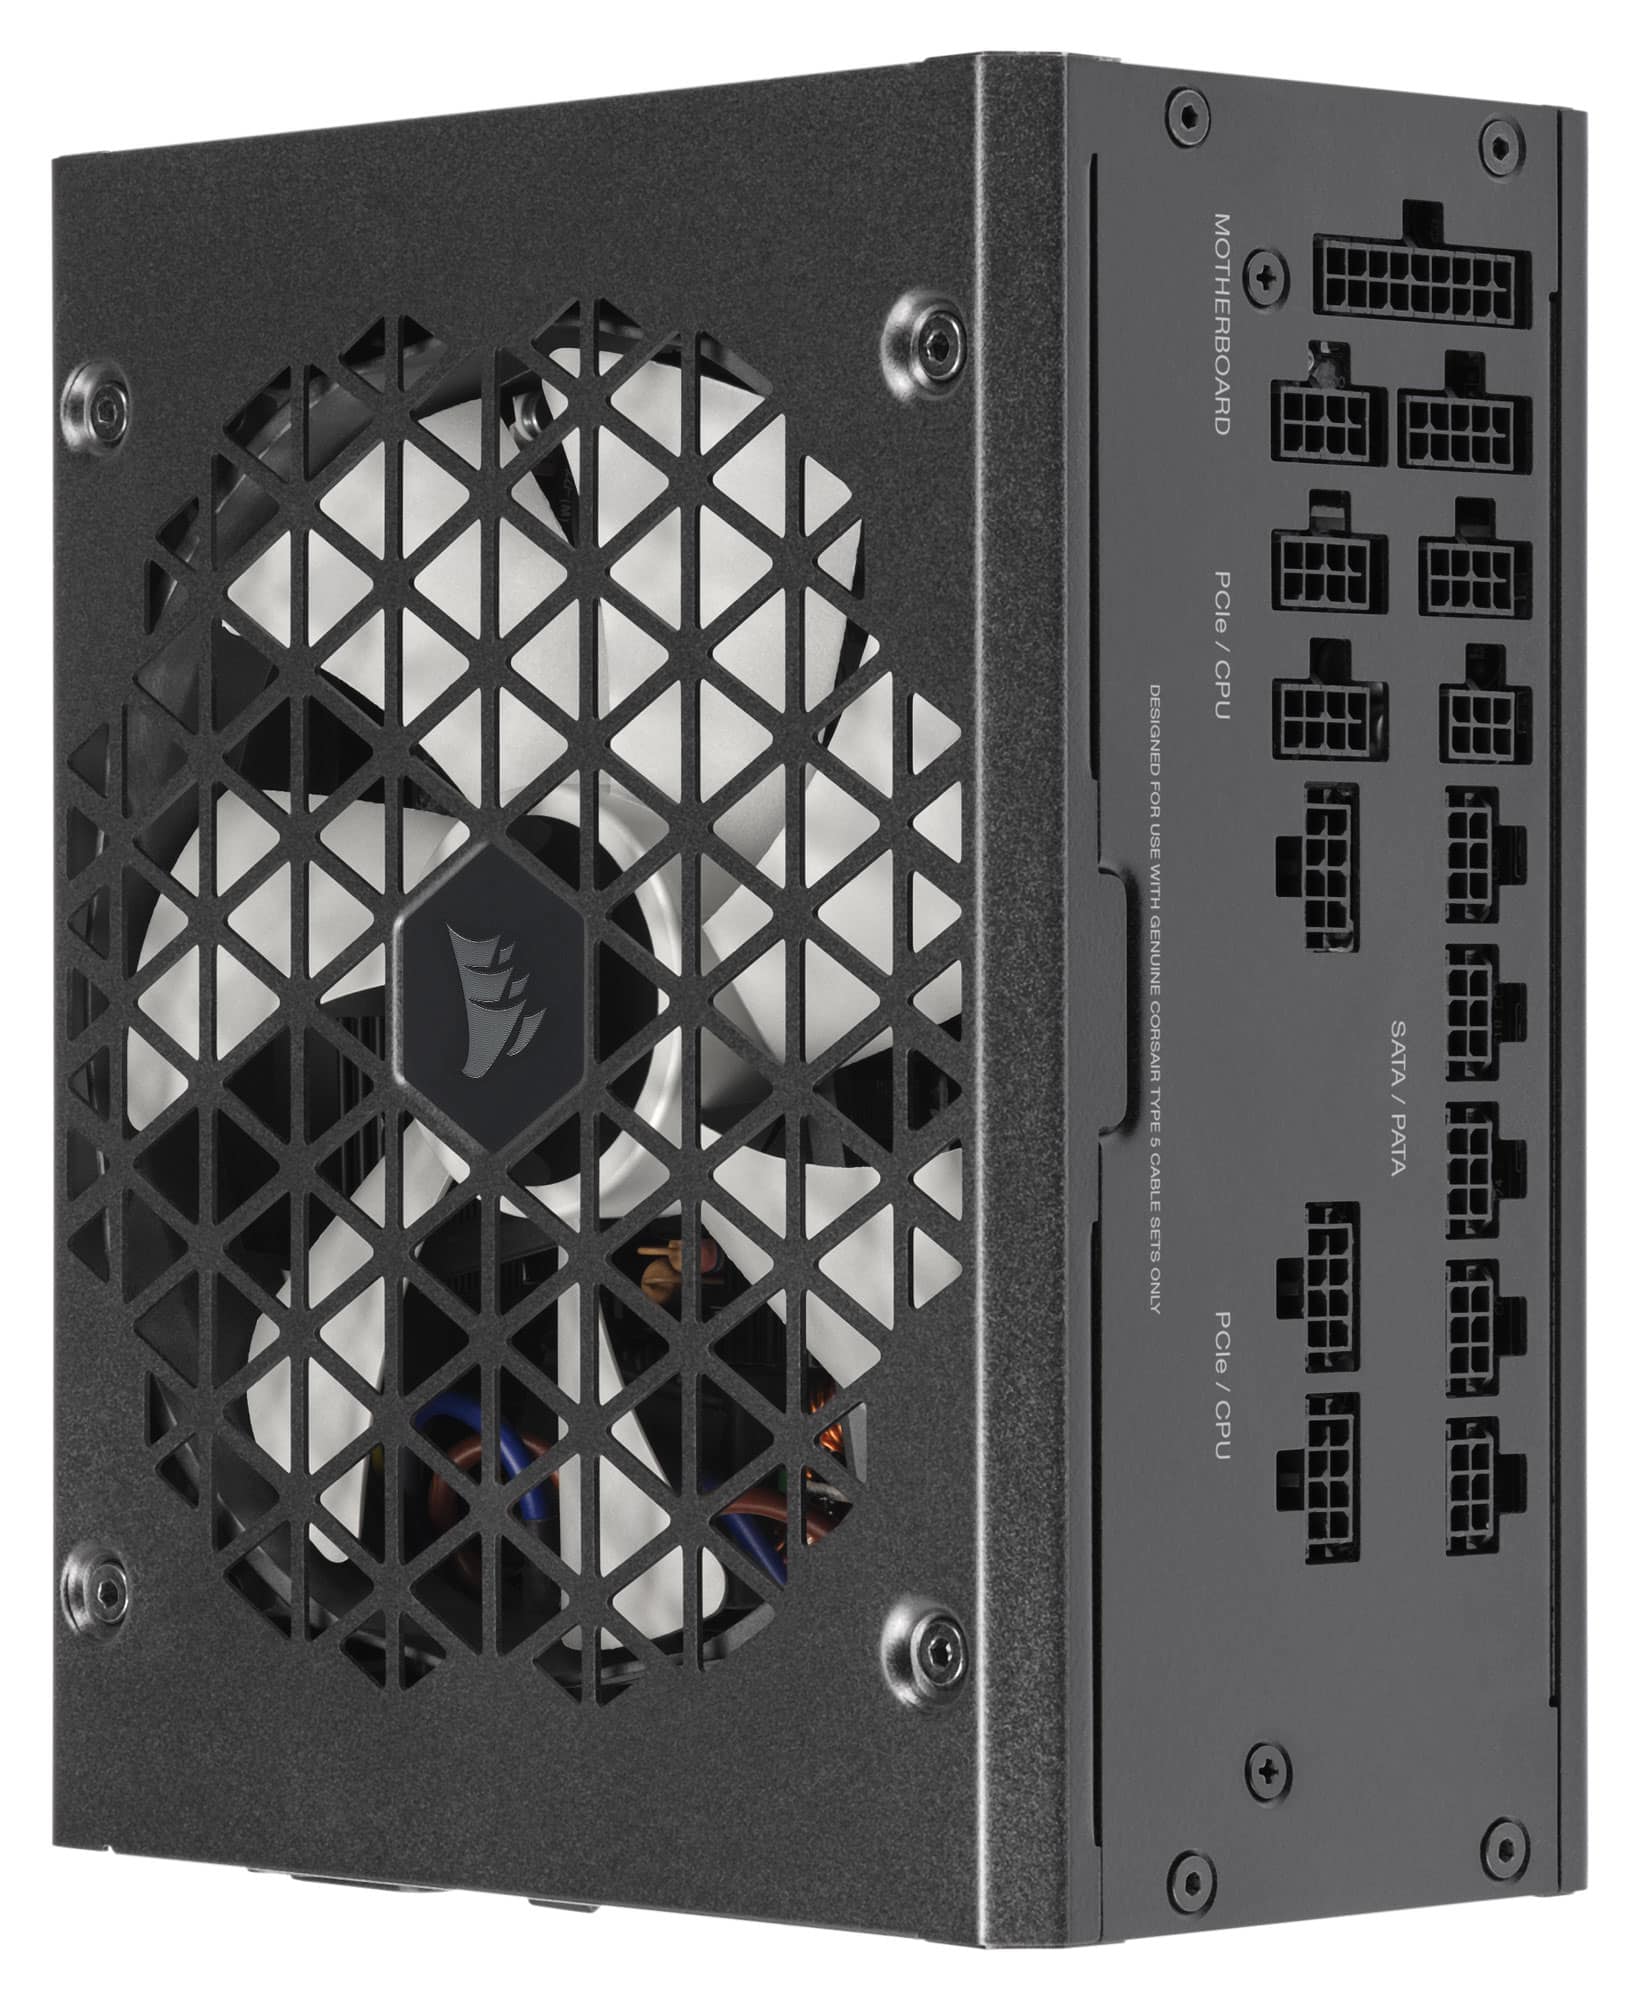 Corsair RM1000x Shift PSU Review: They Shifted the Modular Panel